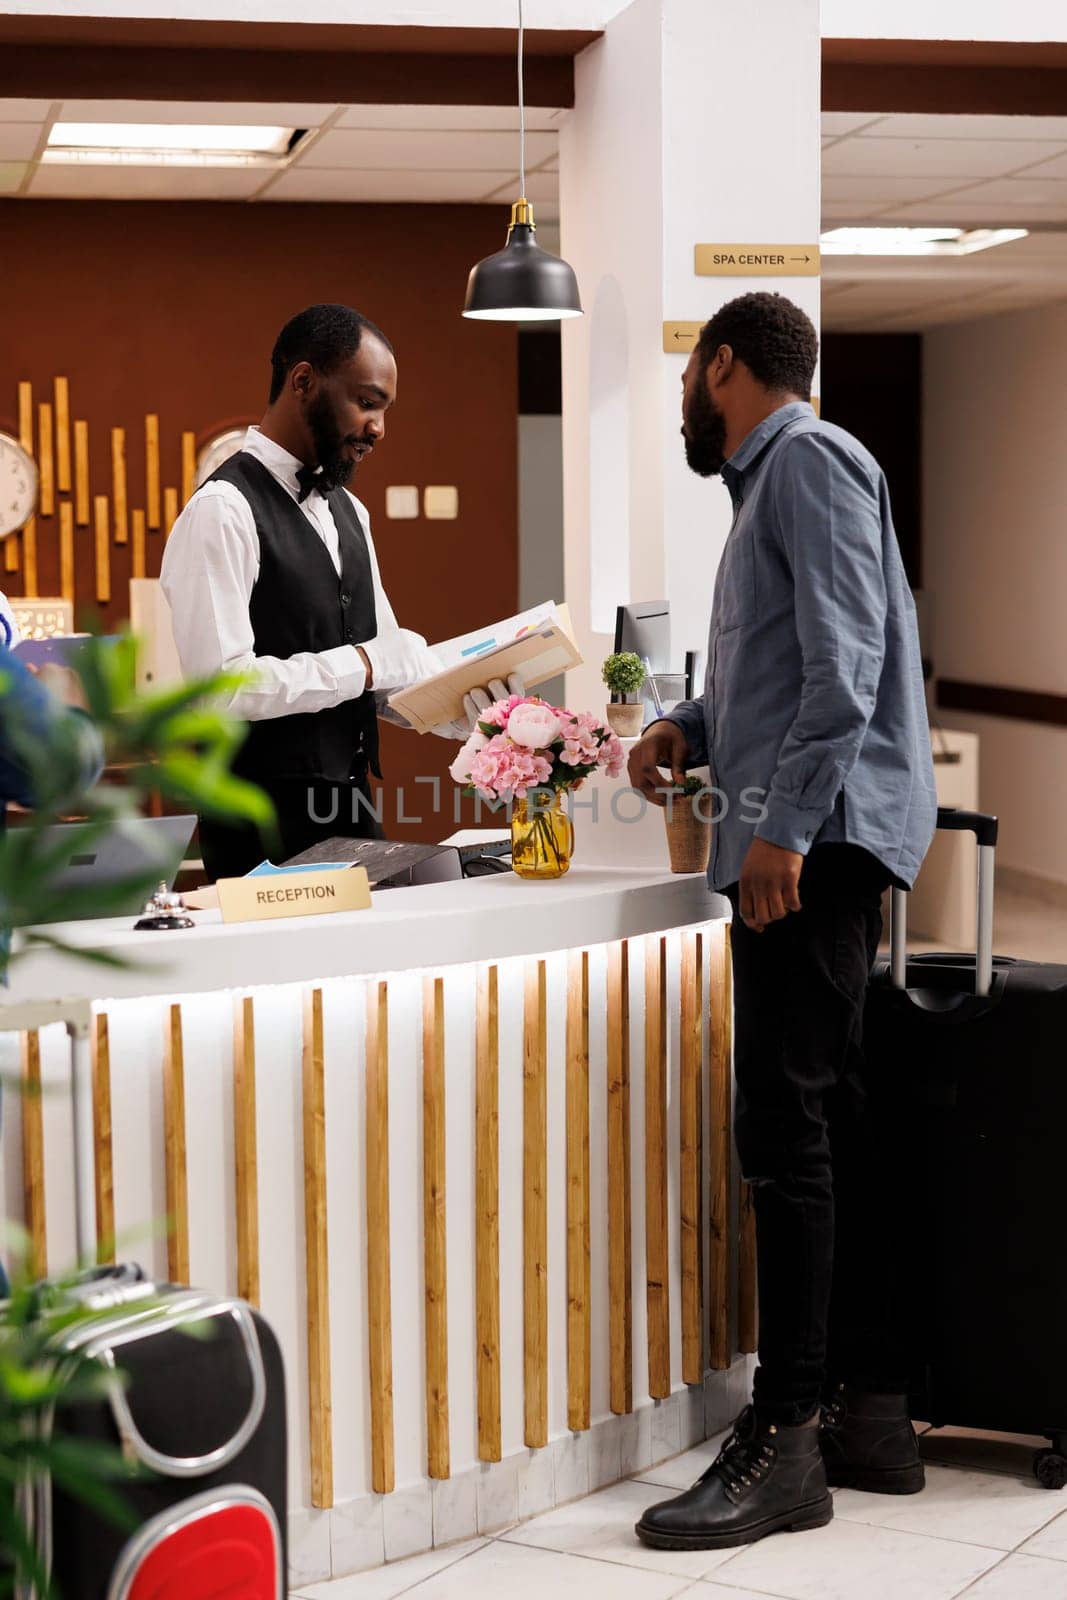 Young African American man front desk agent confirming guest reservation. Male receptionist standing behind reception counter talking with tourist arriving at hotel, checking room availability